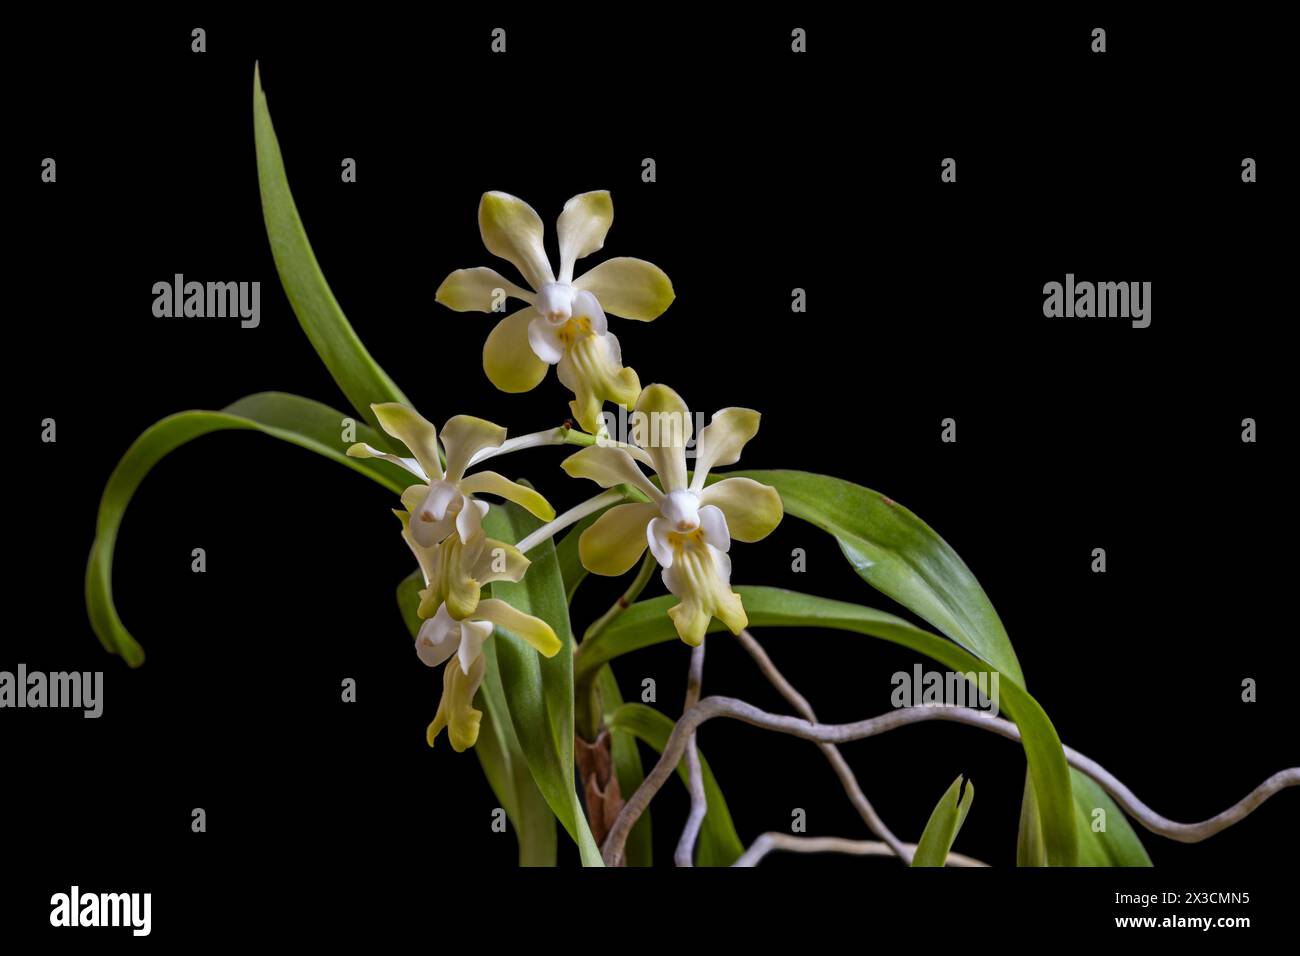 Closeup view of vanda denisoniana epiphytic orchid species blooming with yellow and white flowers isolated on black background Stock Photo